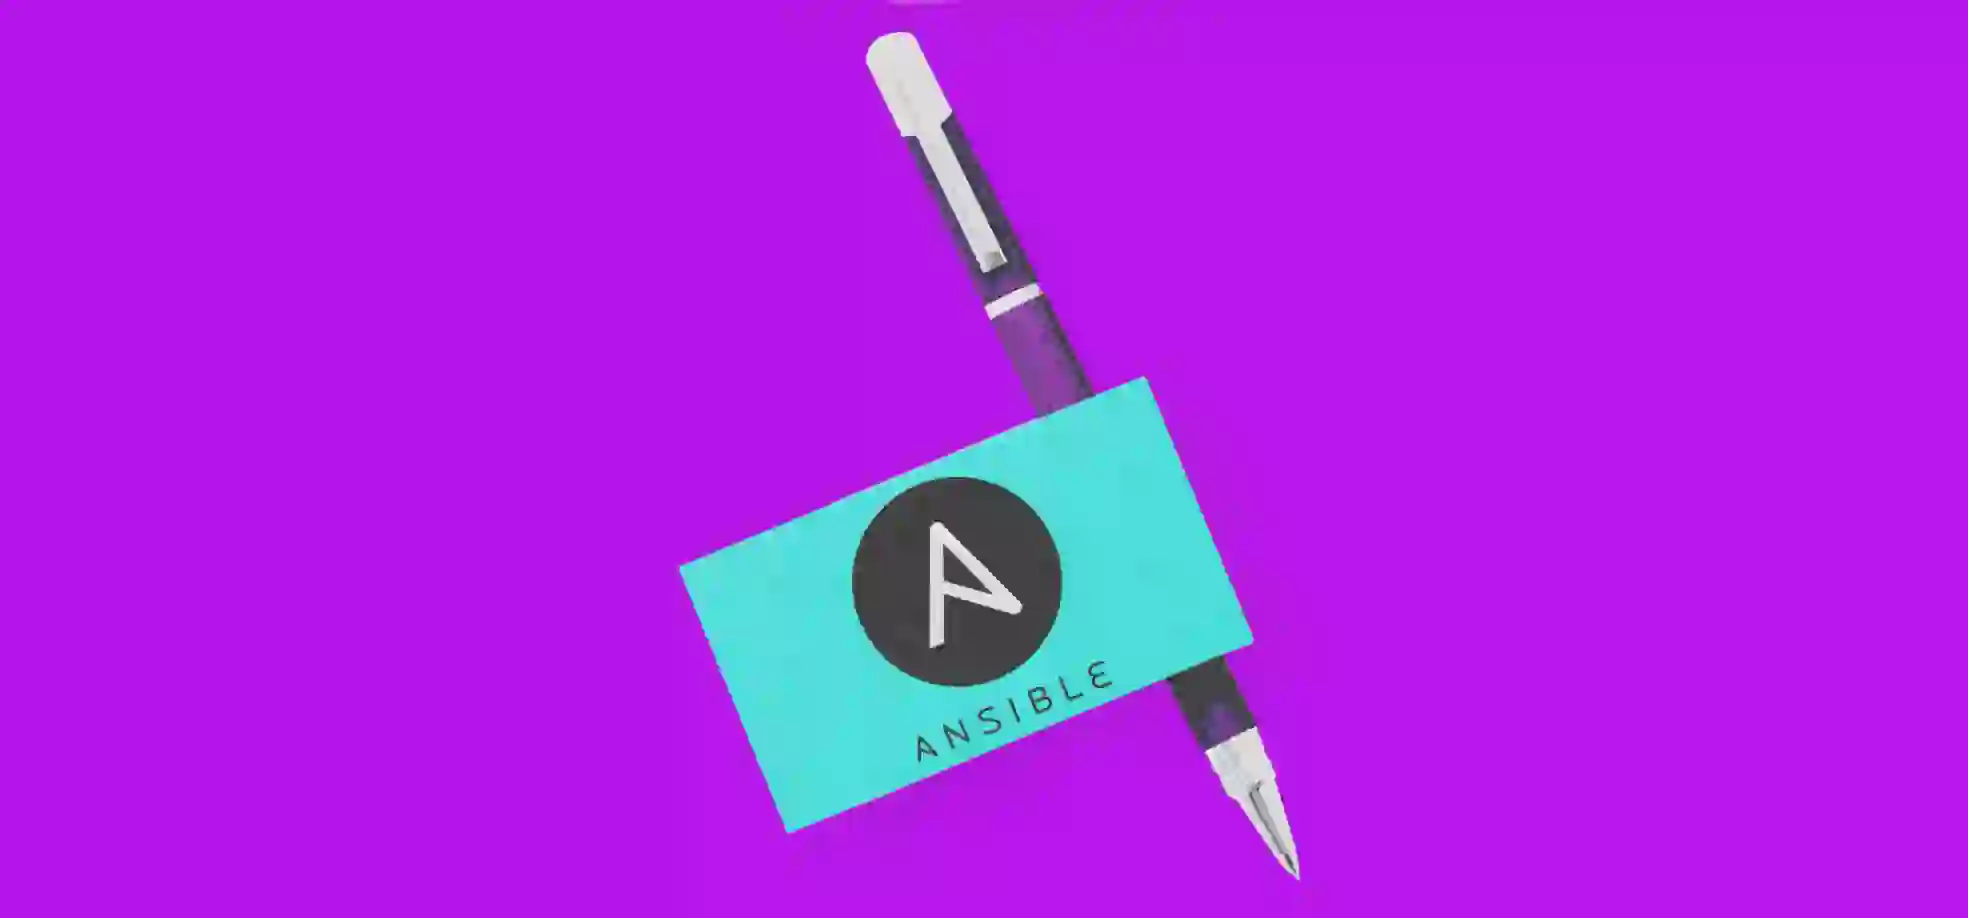 illustration of a pen on a purple background